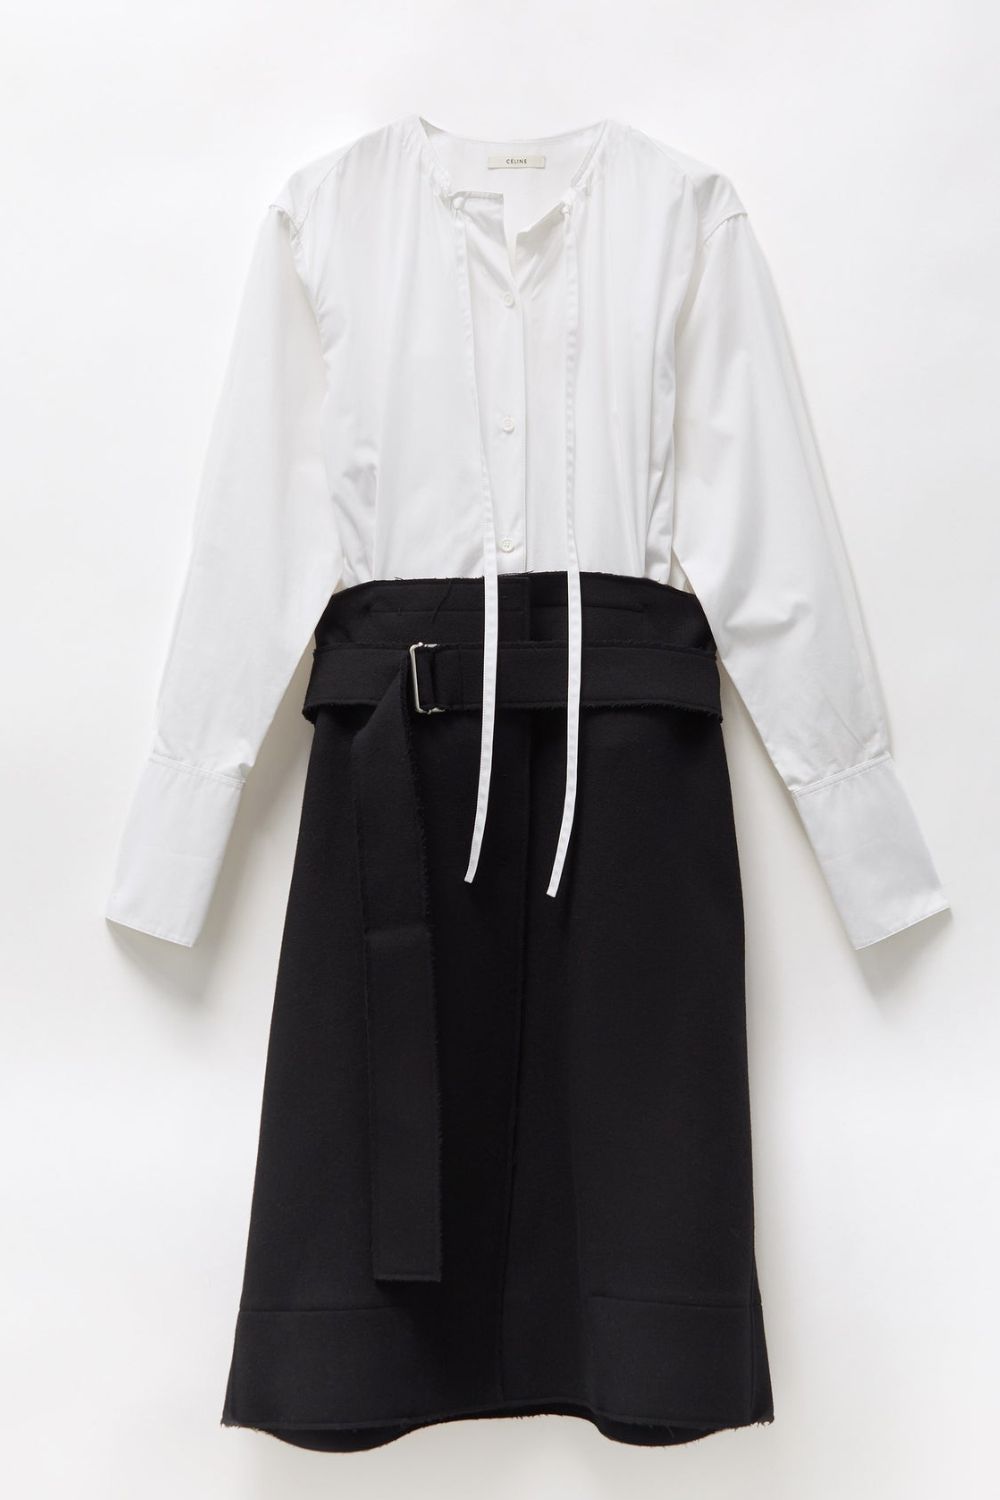 Shop the best 'Old Celine' by Phoebe Philo. Re-SEE is where you